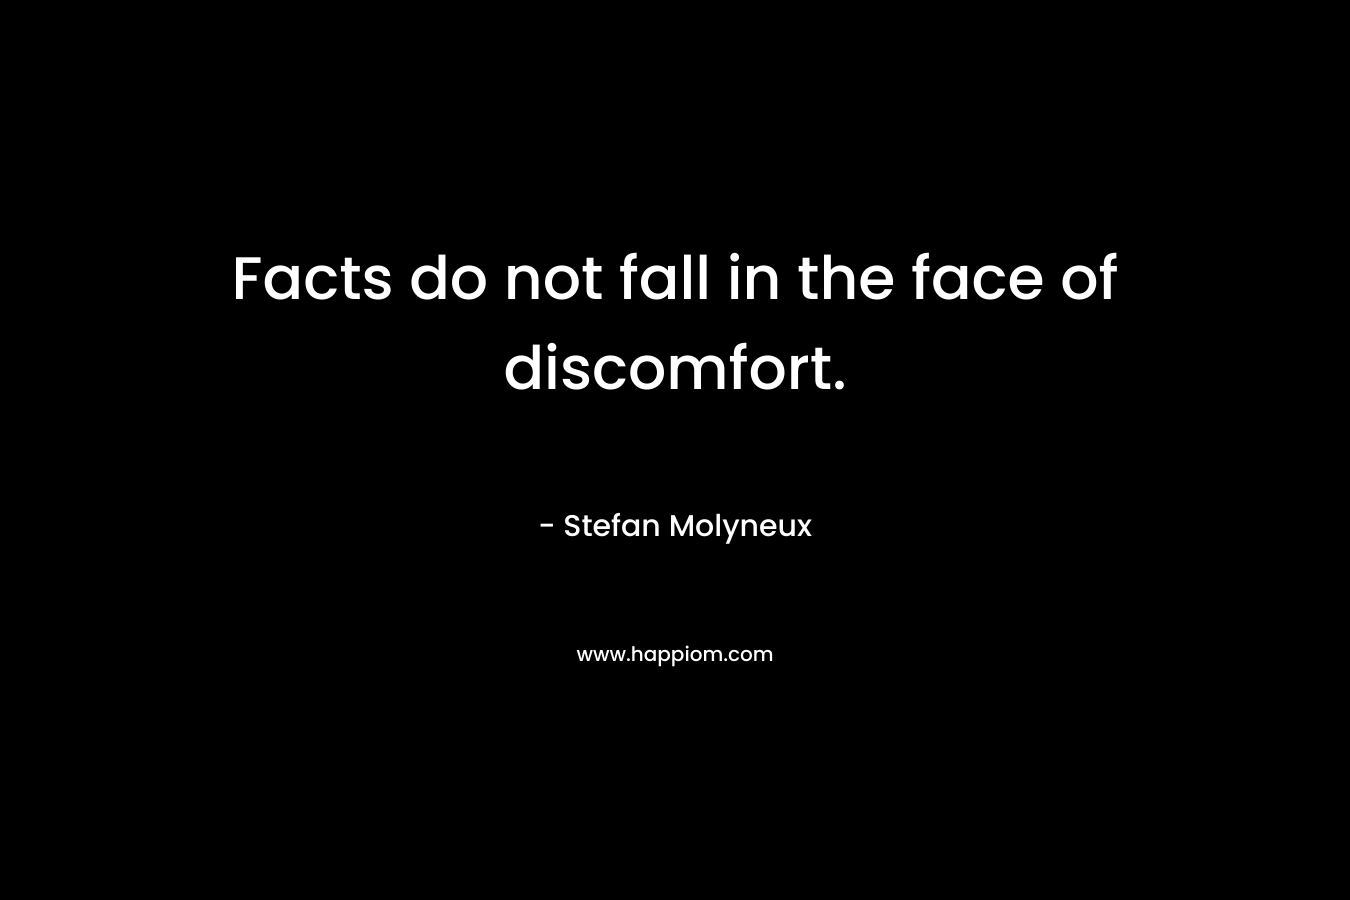 Facts do not fall in the face of discomfort.